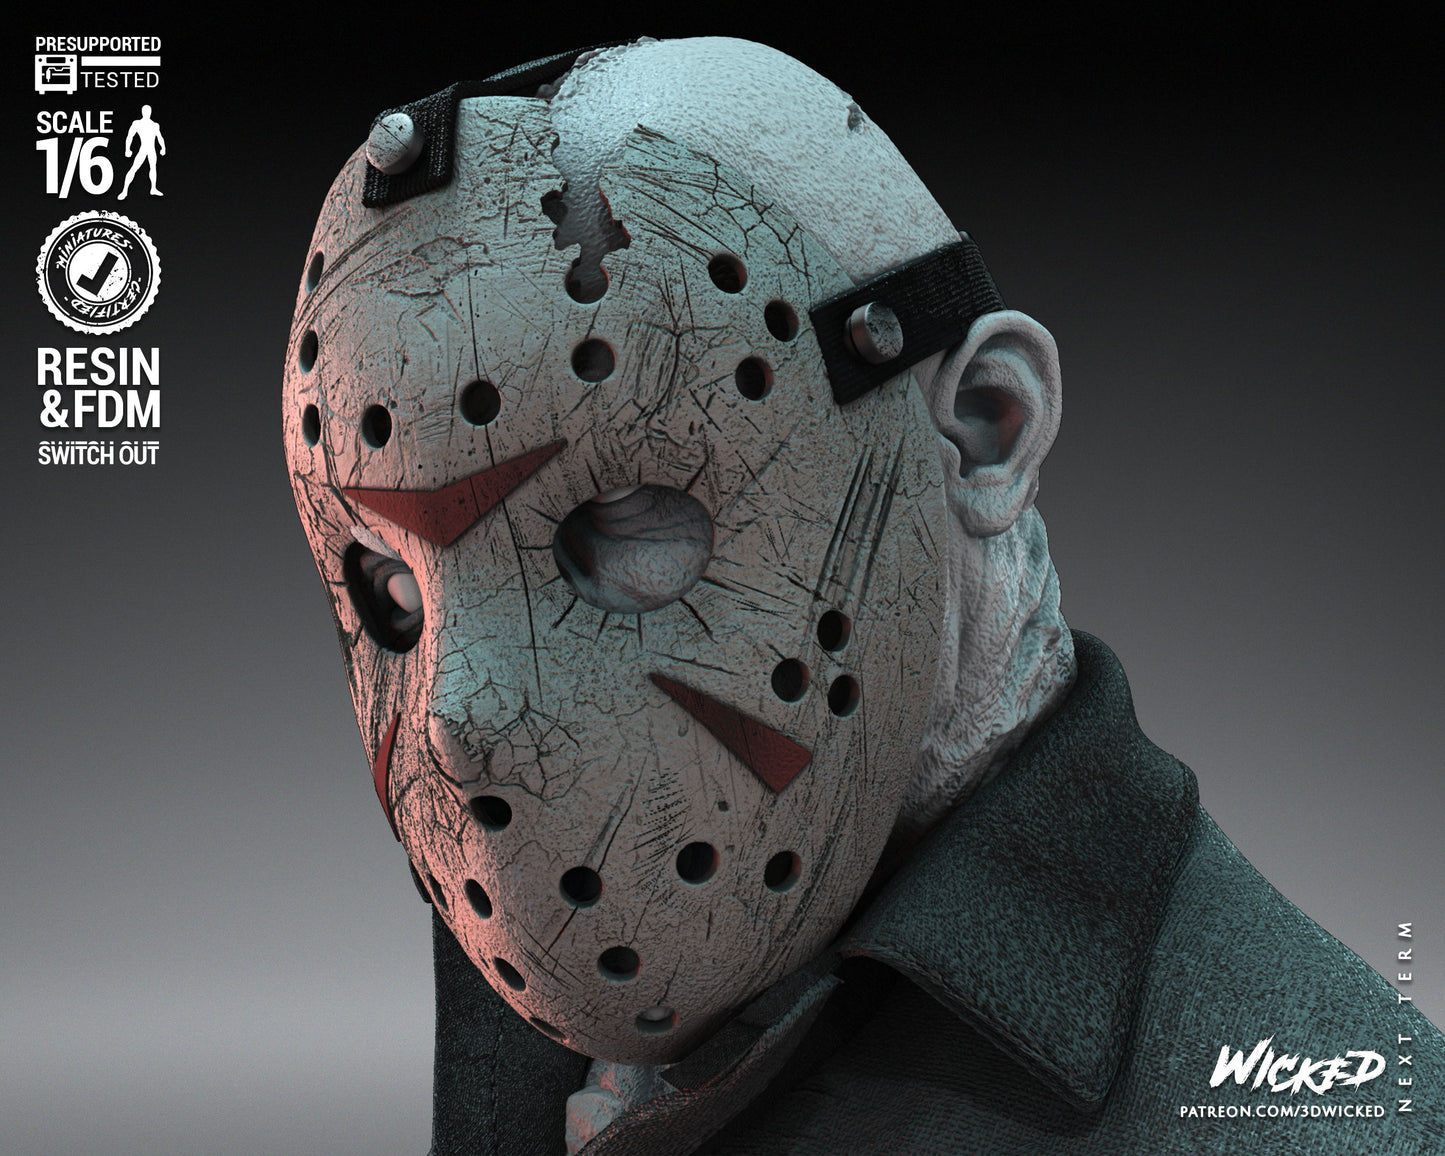 Jason Voorhees (Friday The 13th) Statue